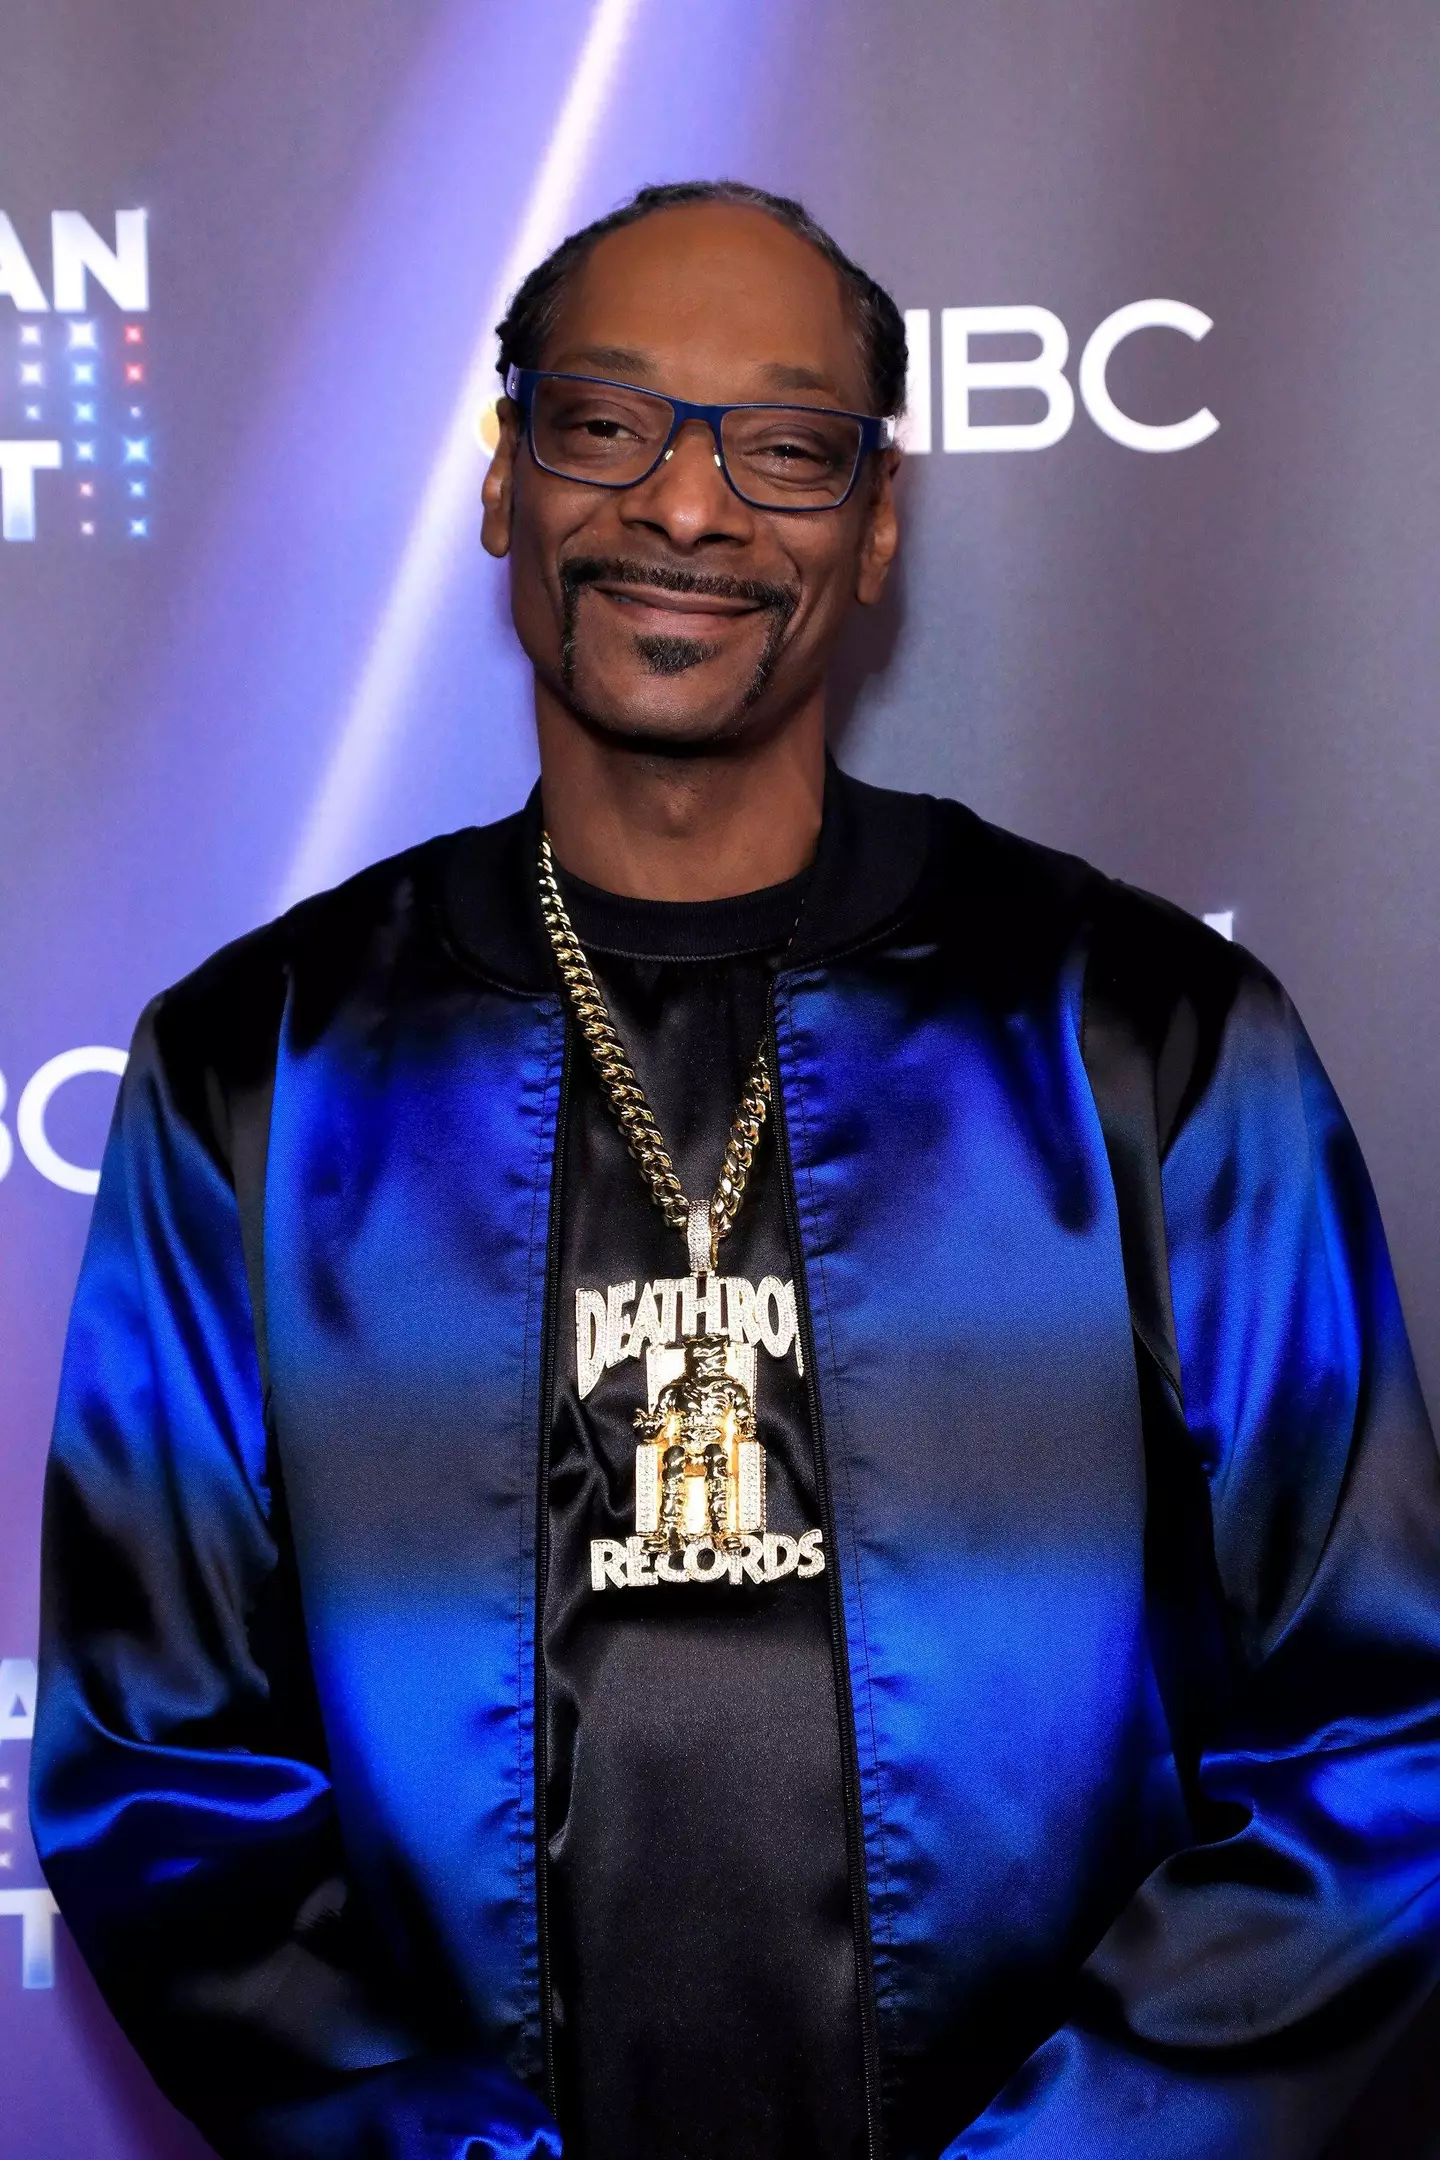 Snoop Dogg has revealed the only man who has ever outsmoked him.